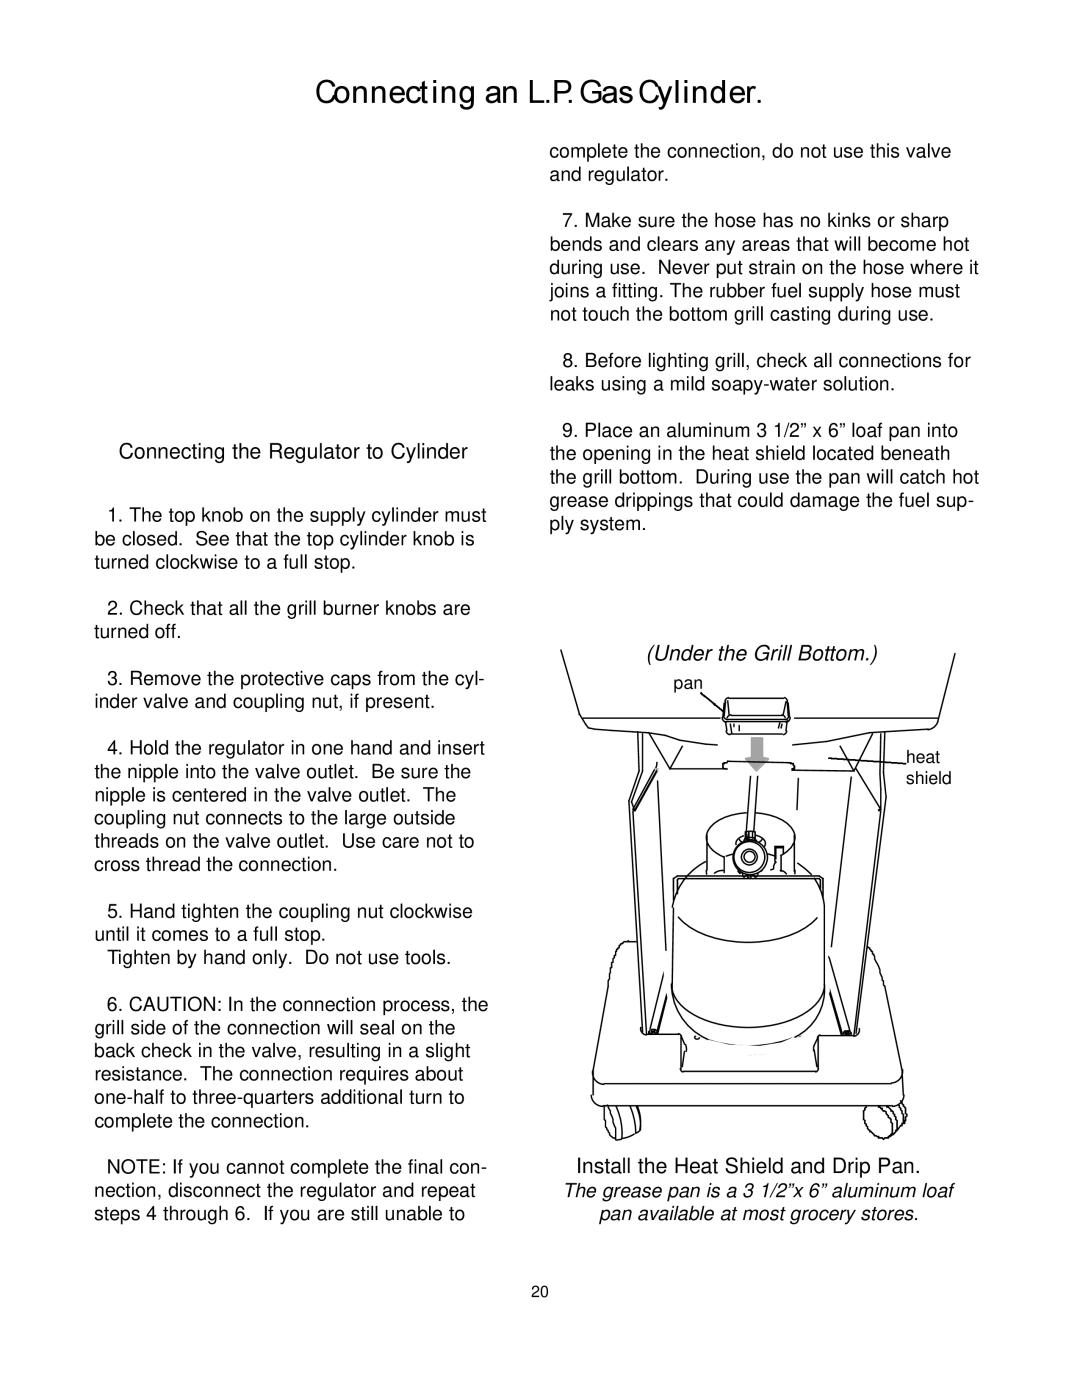 CFM Corporation 7000 owner manual Connecting an L.P. Gas Cylinder, Connecting the Regulator to Cylinder 